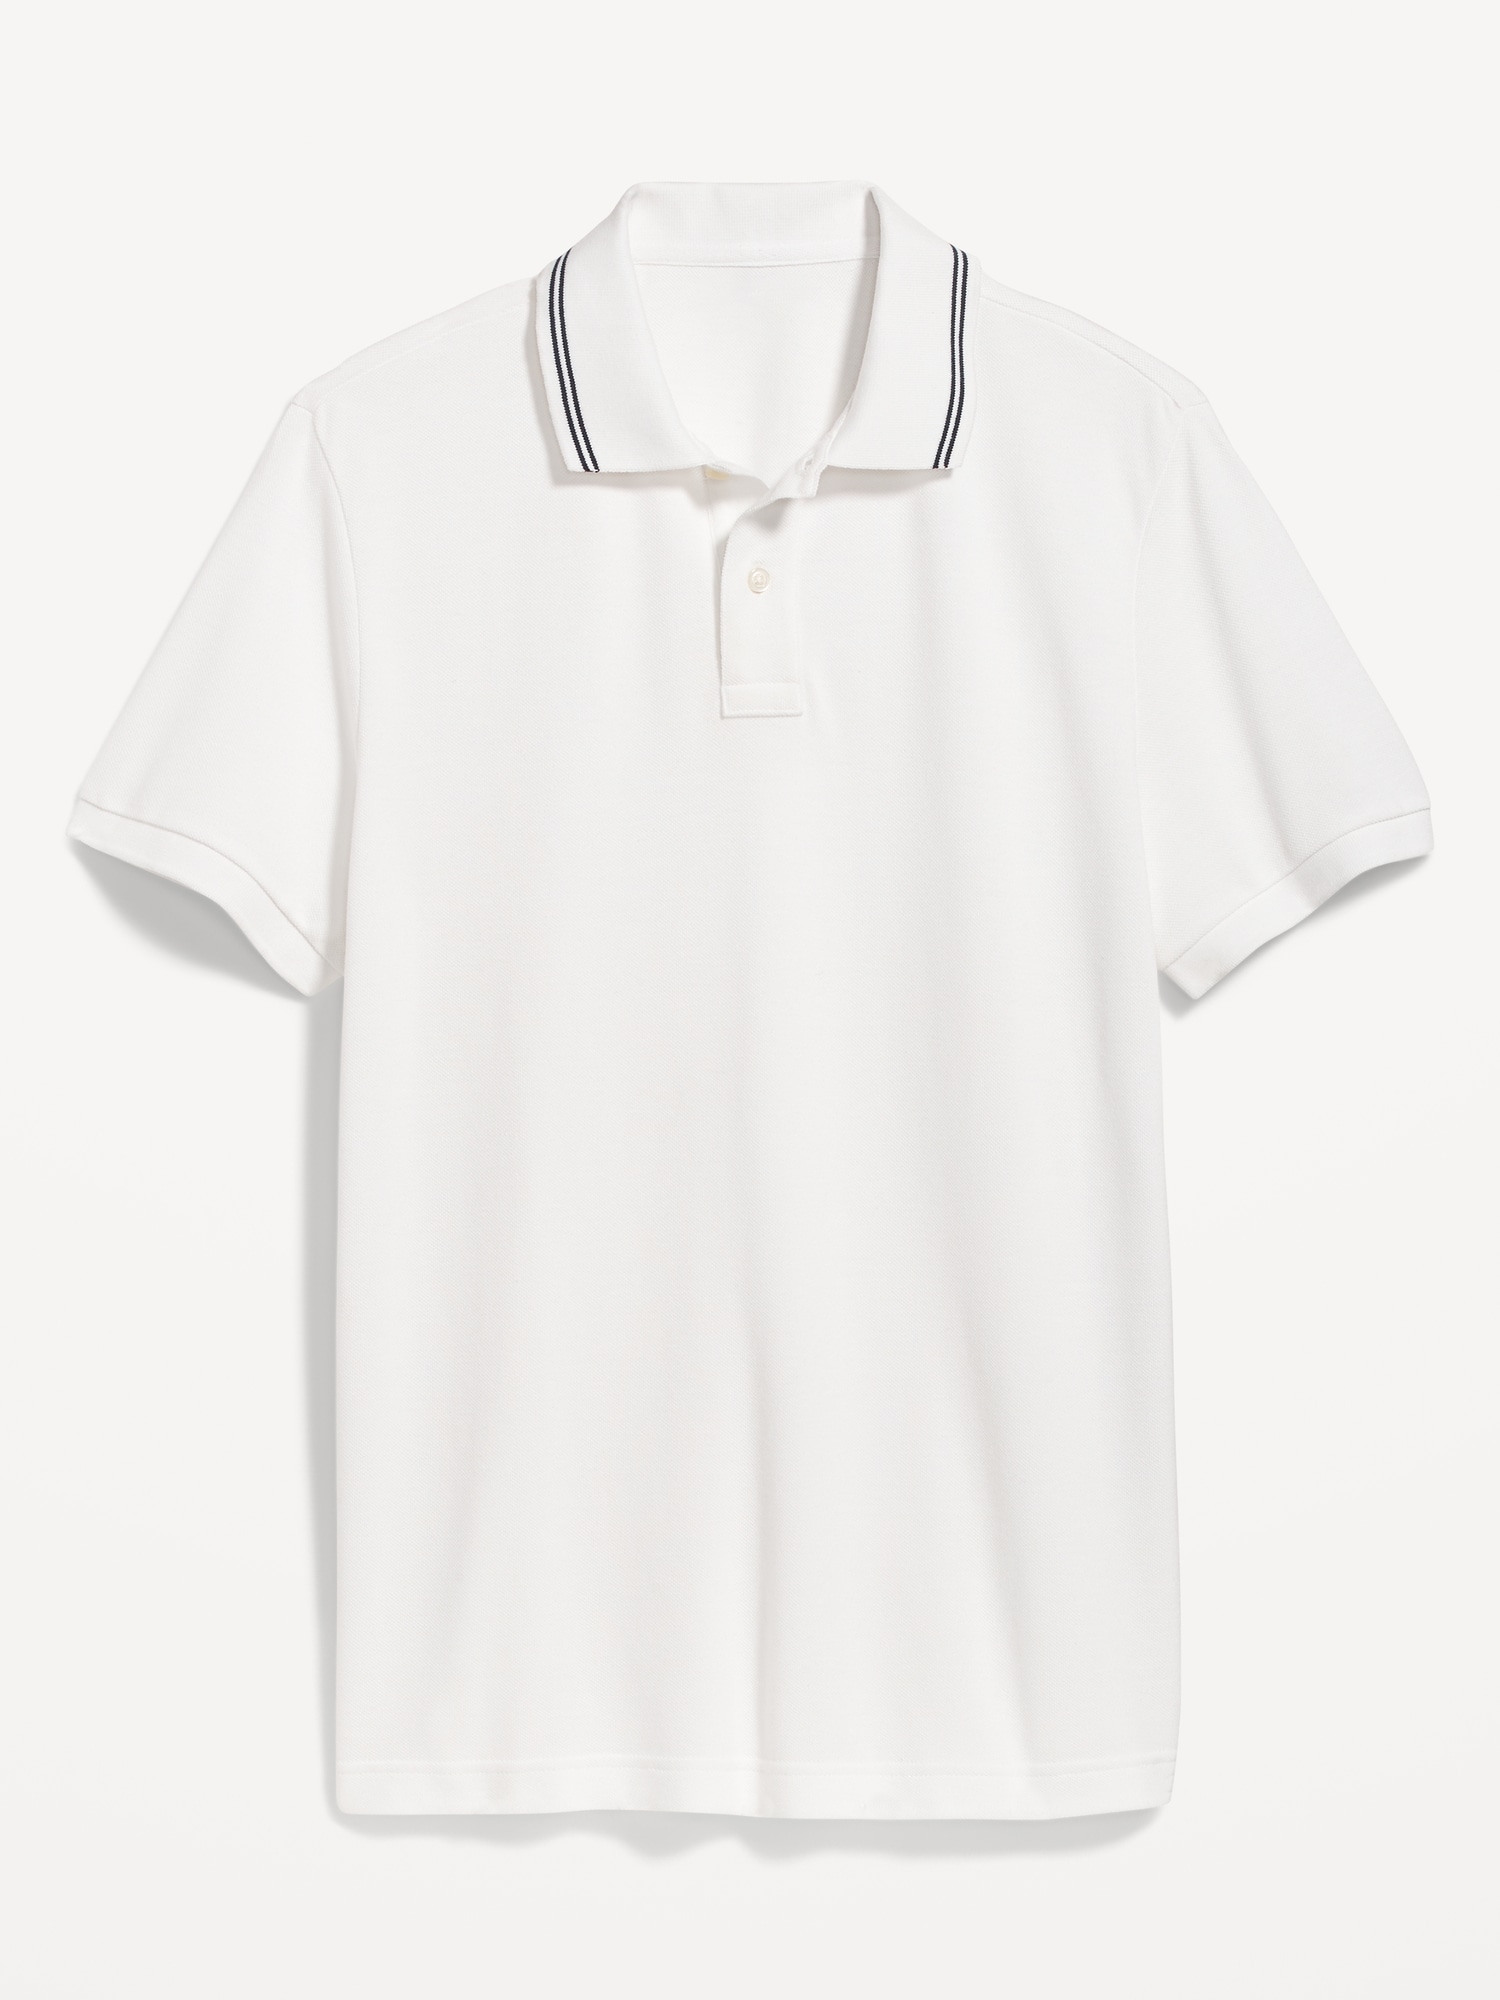 Tipped-Collar Classic Fit Pique Polo | Old Navy